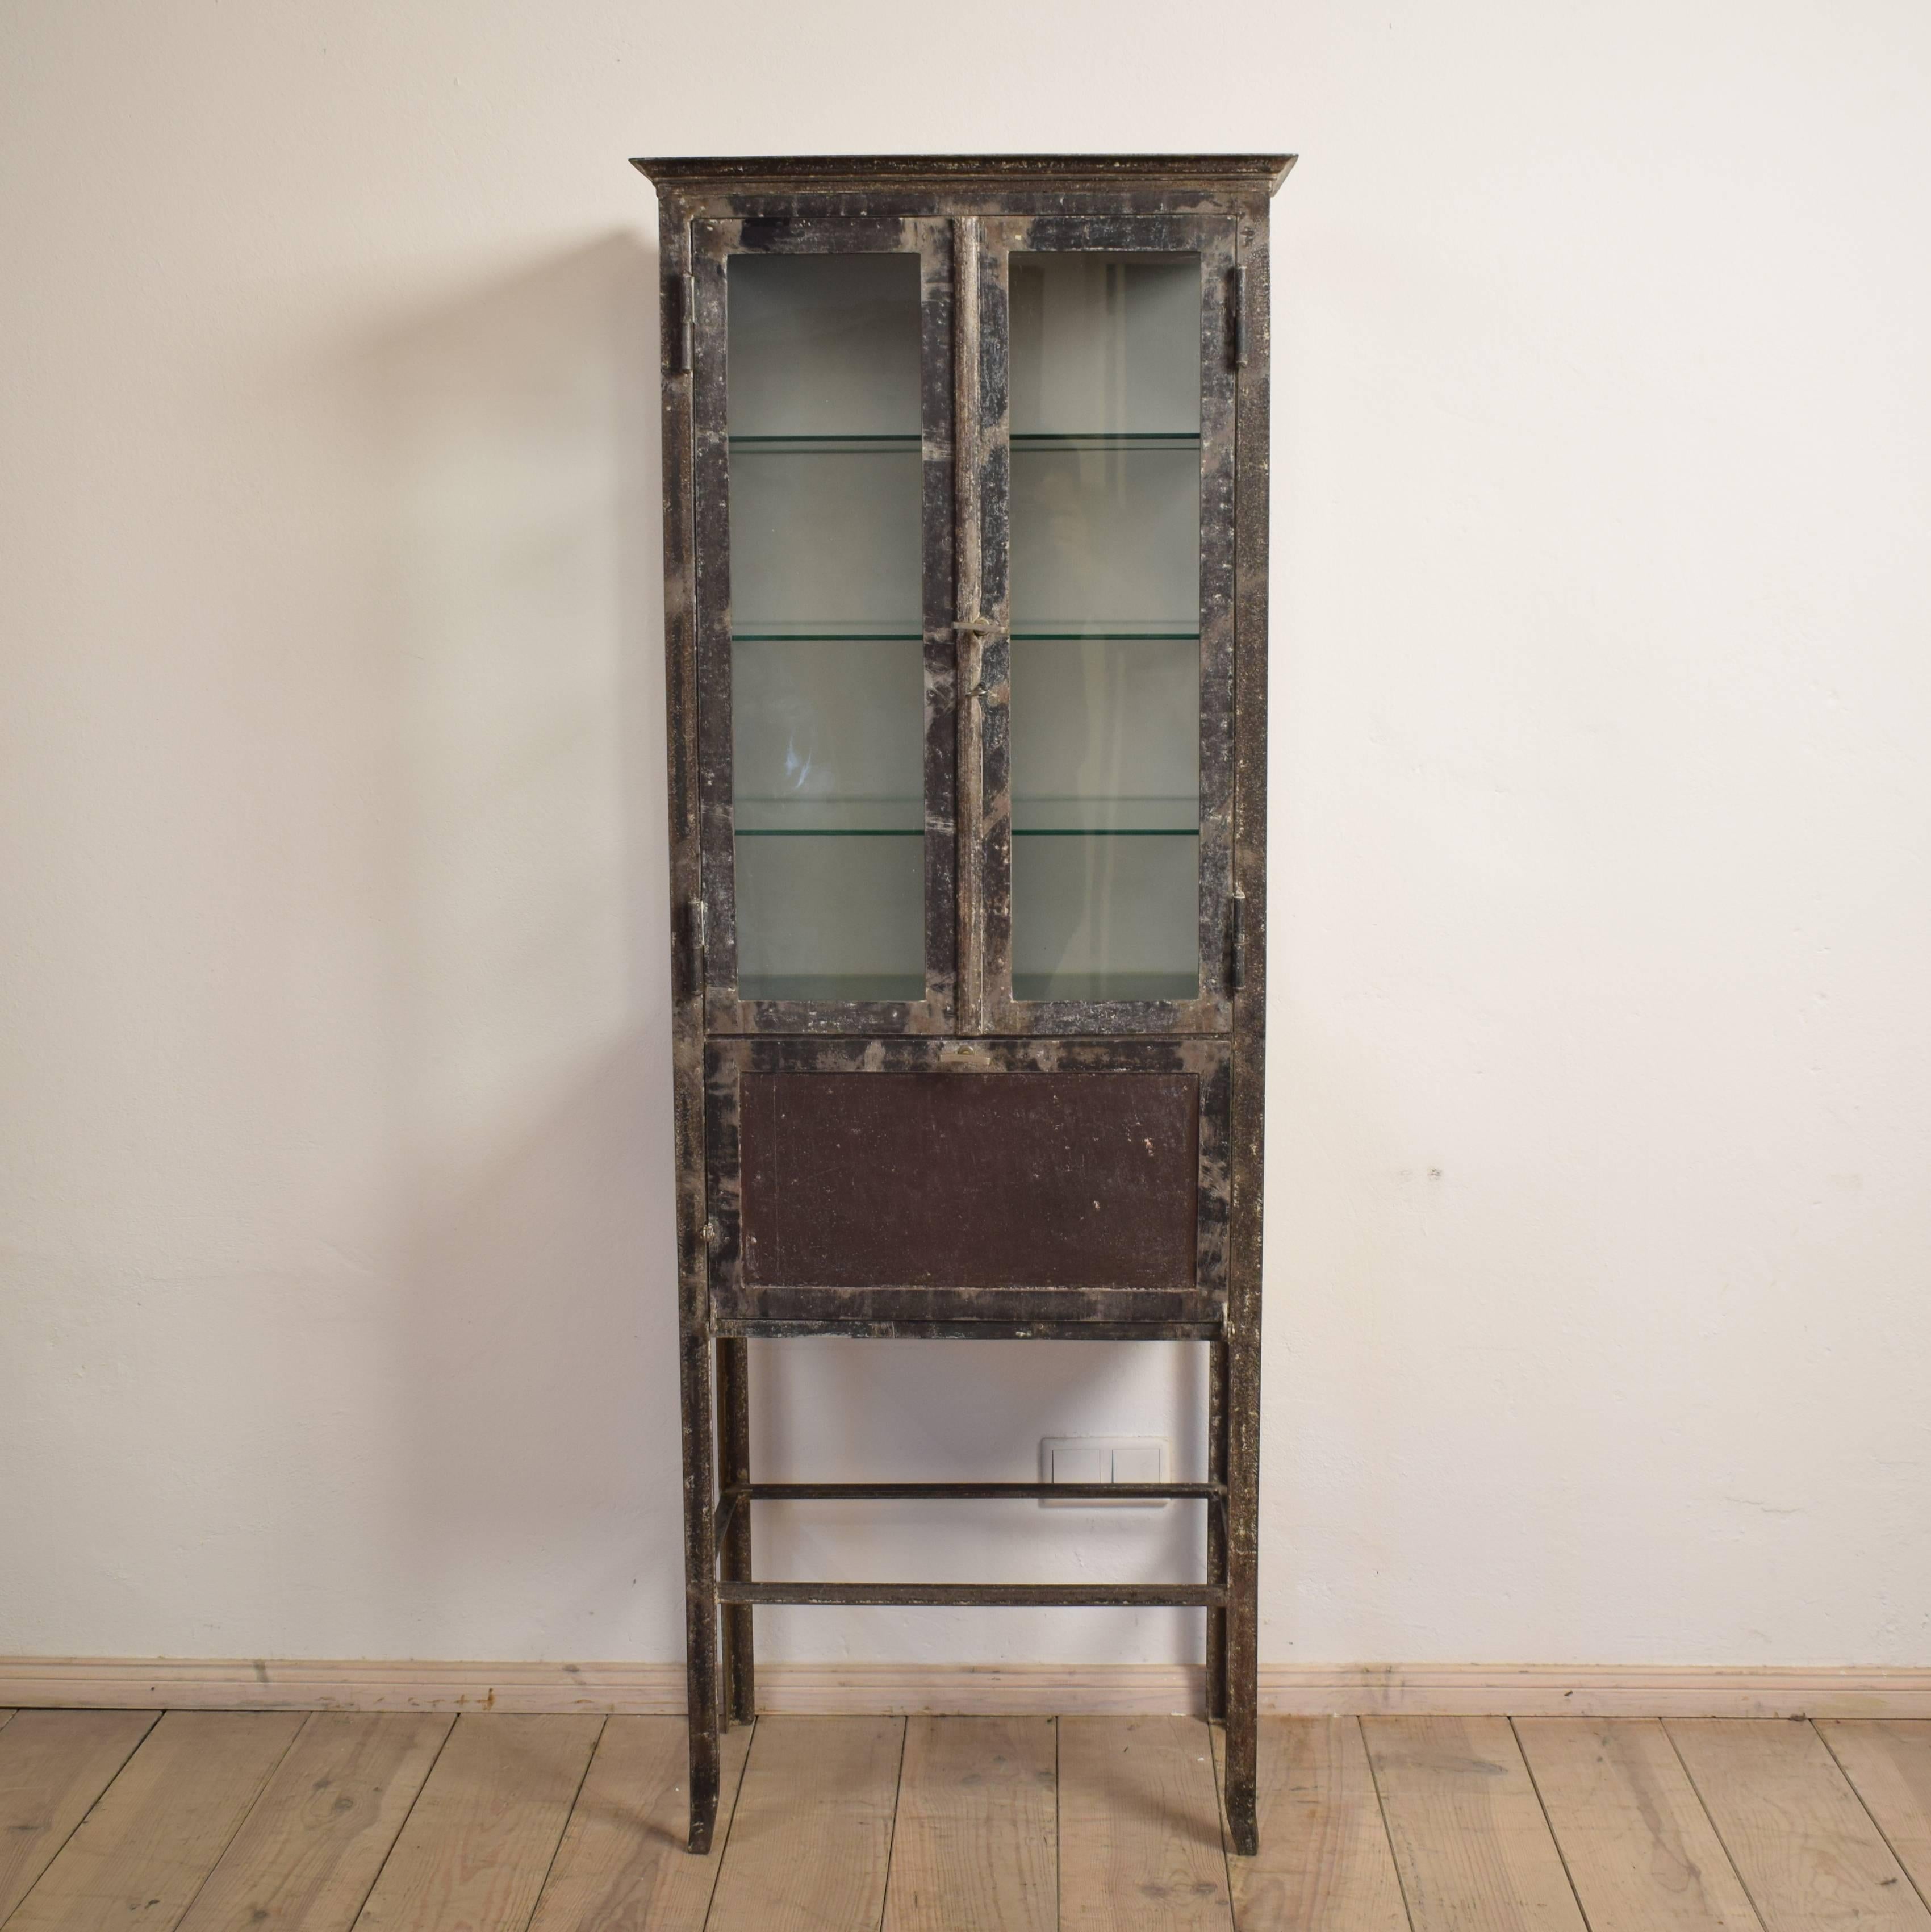 This Industrial Bauhaus style display cabinet was made circa 1930. The top part features glass and the lower part is closed and features a flap door.